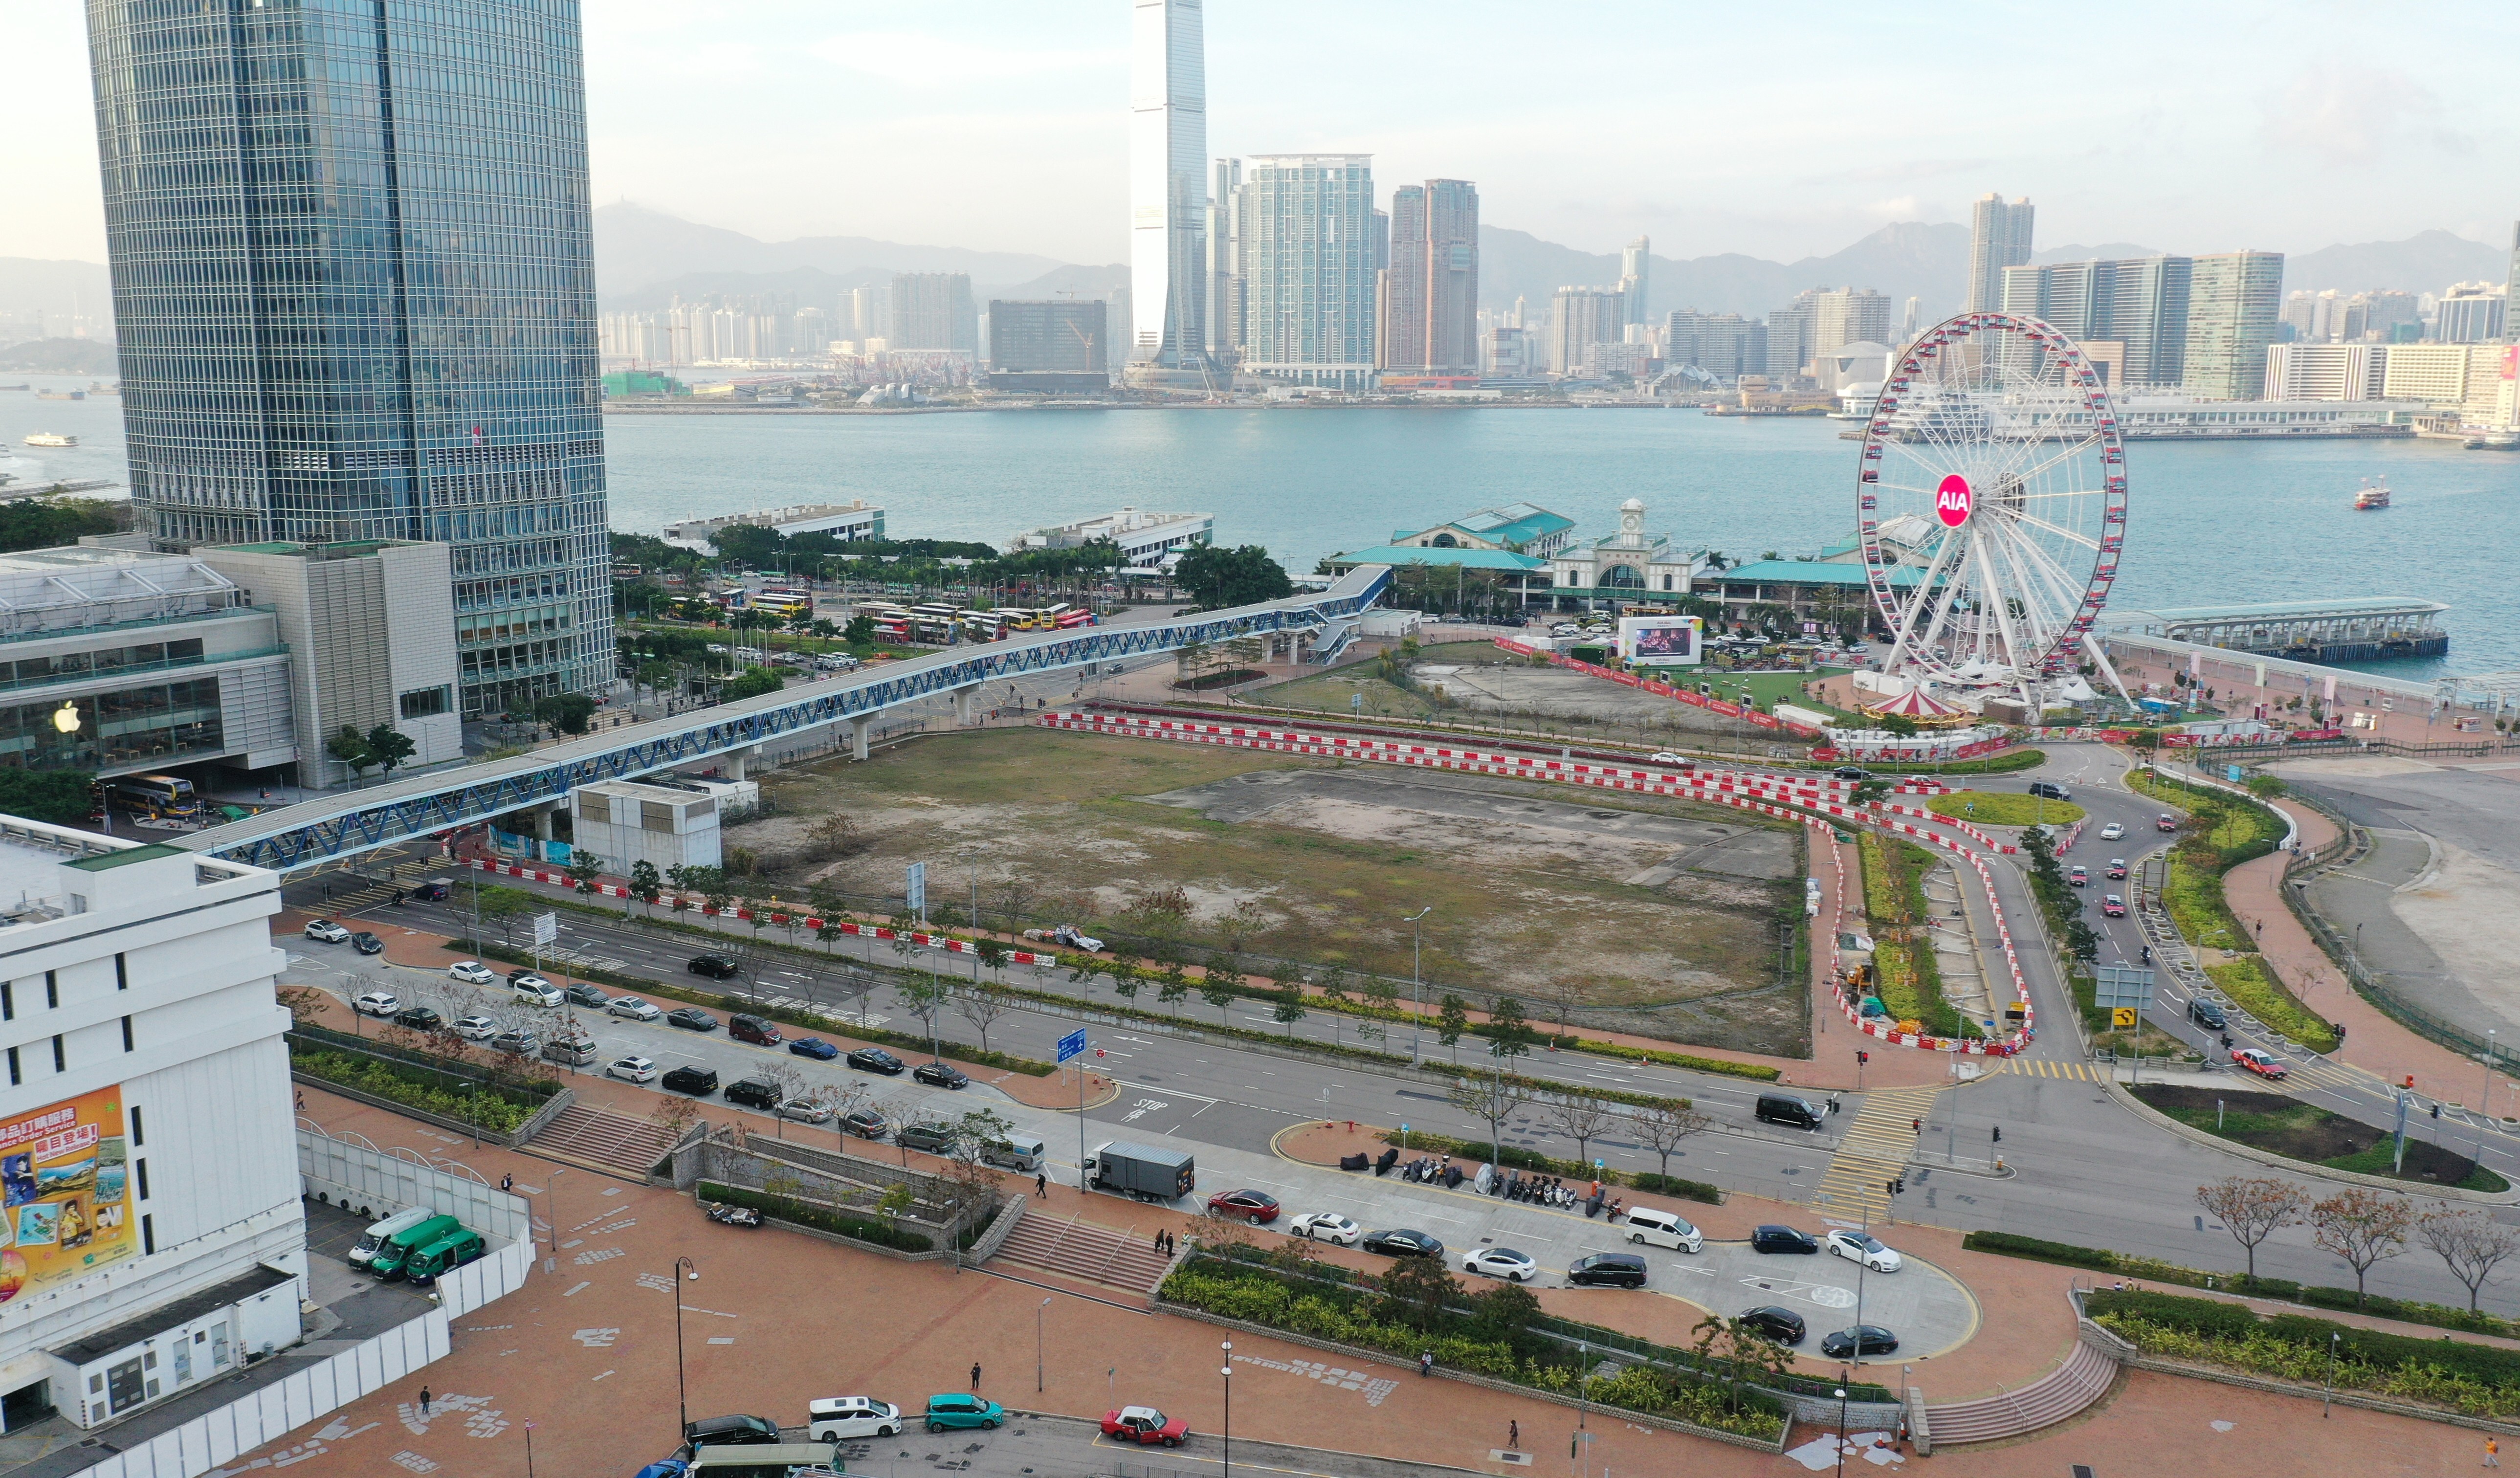 A record-setting HK$50.8 billion was paid for a 50-year land grant on a prime piece of harbourfront property, the government revealed last week. Photo: Winson Wong